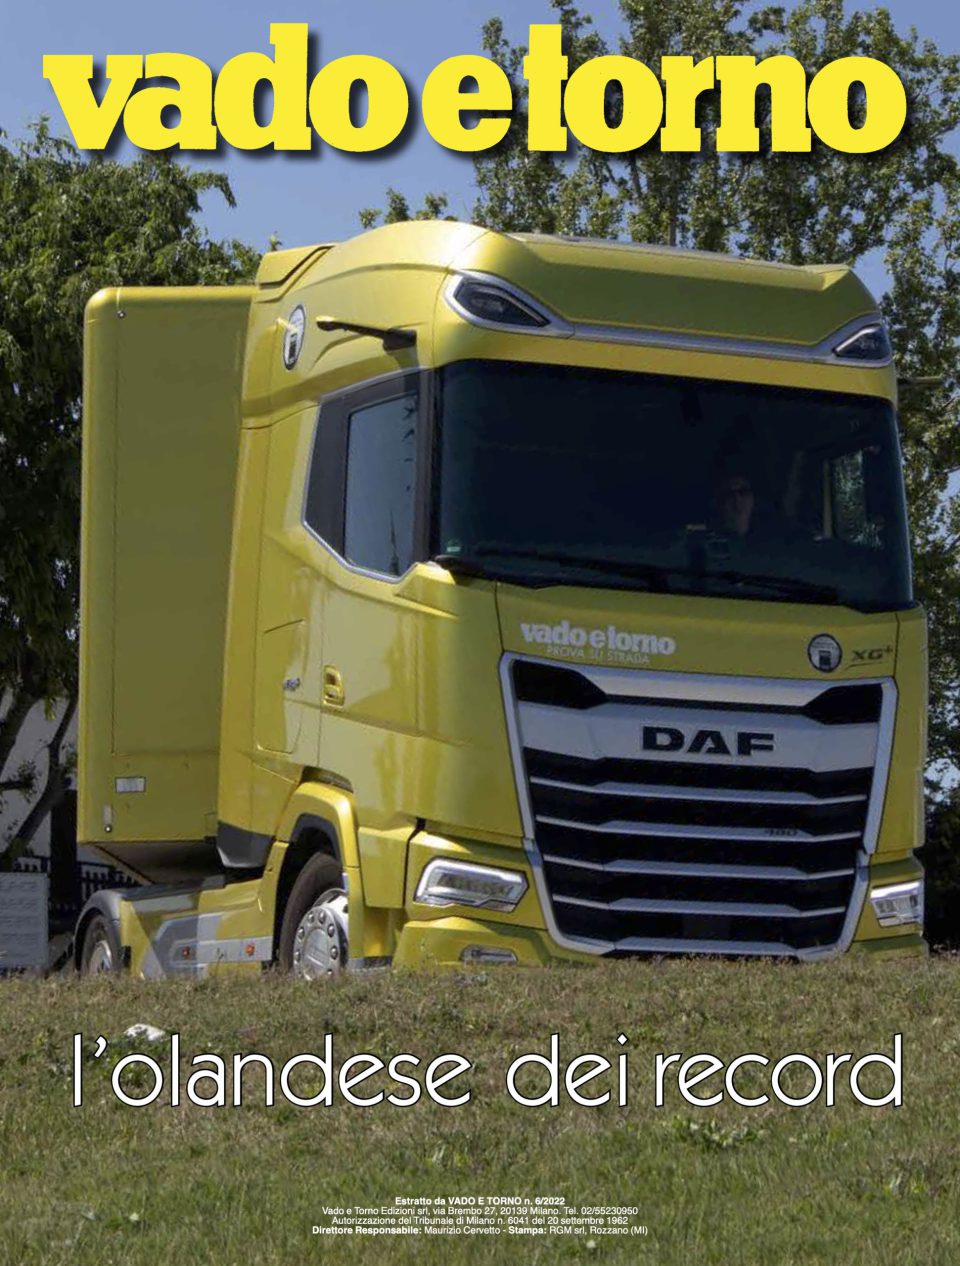 daf speciale